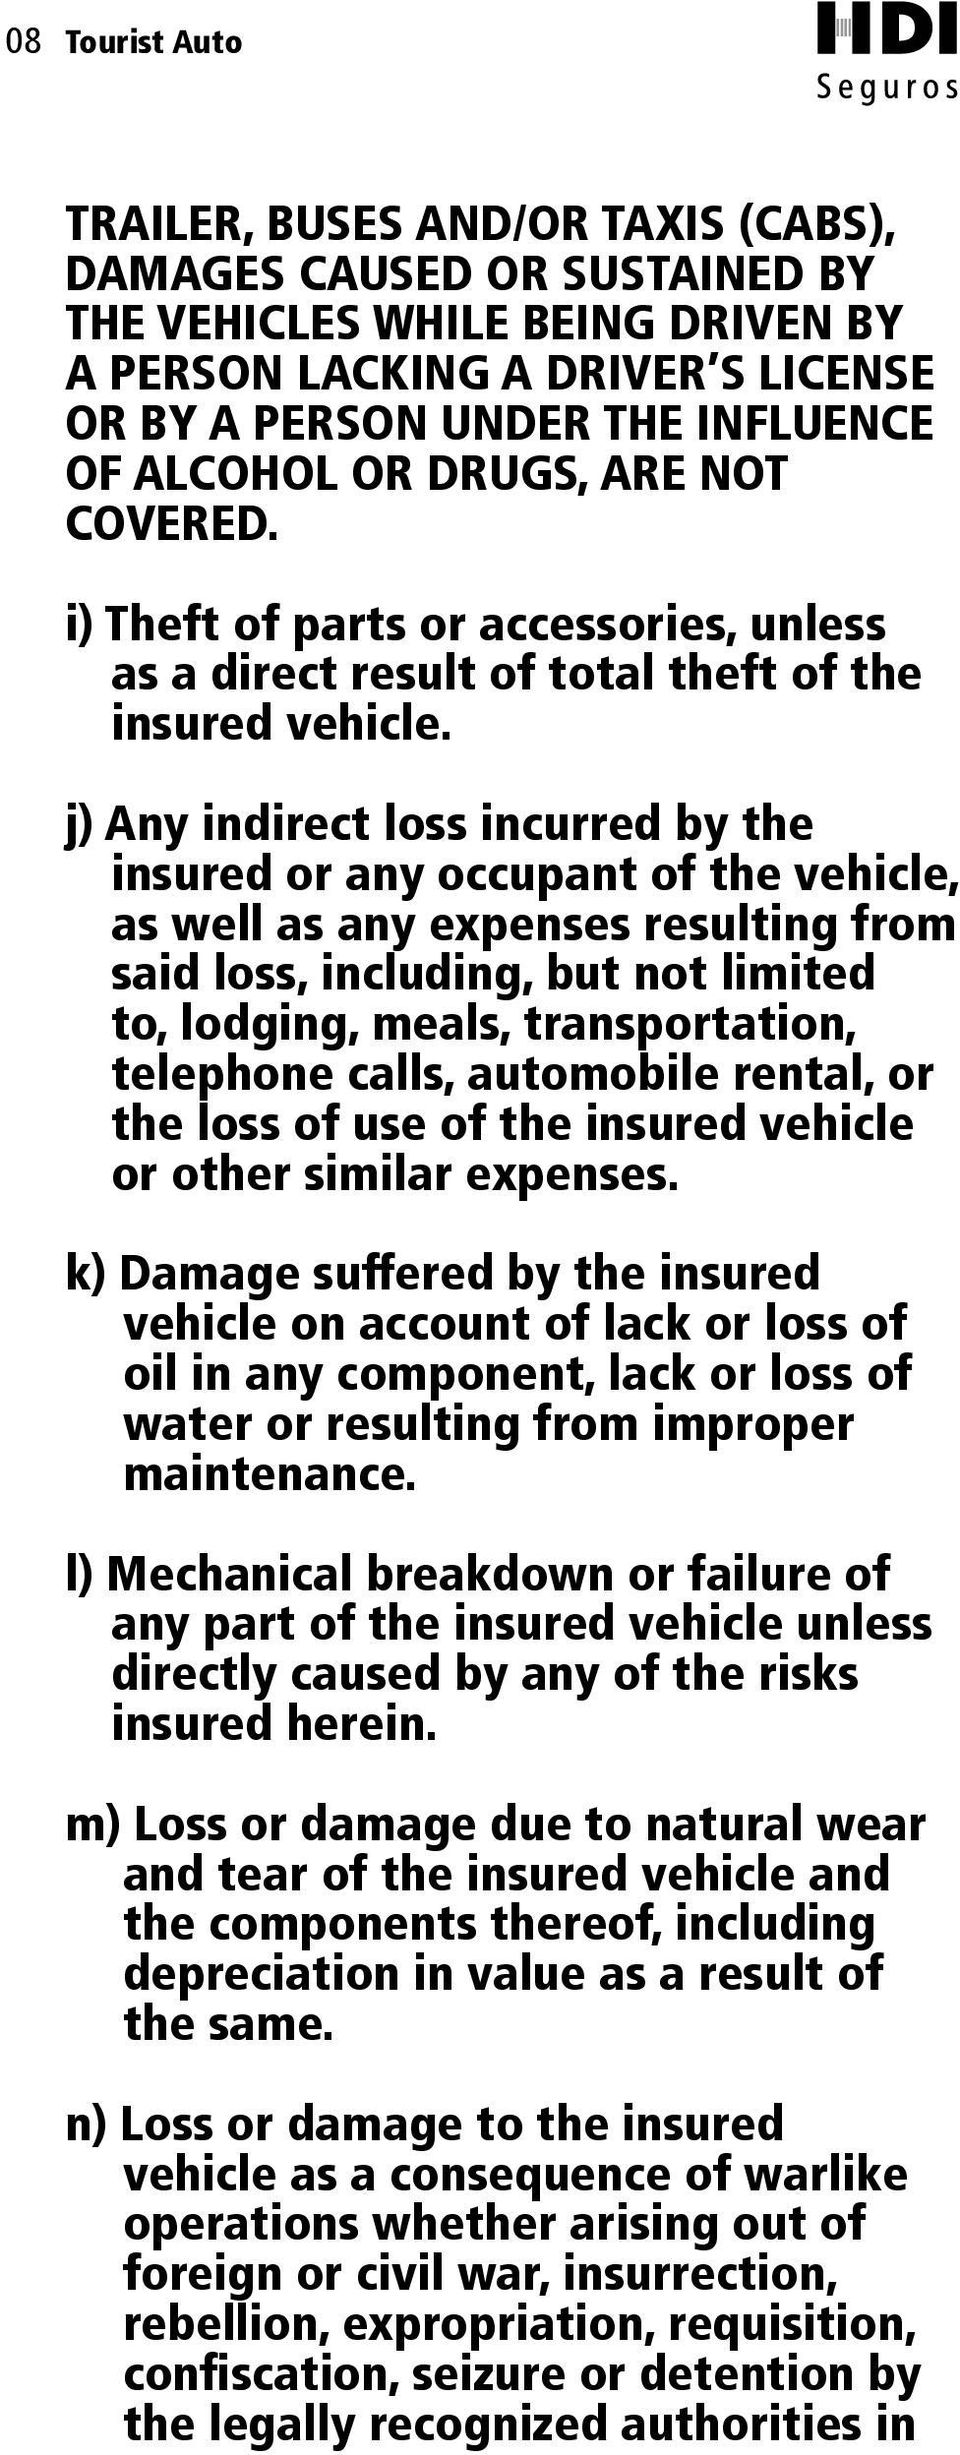 j) Any indirect loss incurred by the insured or any occupant of the vehicle, as well as any expenses resulting from said loss, including, but not limited to, lodging, meals, transportation, telephone